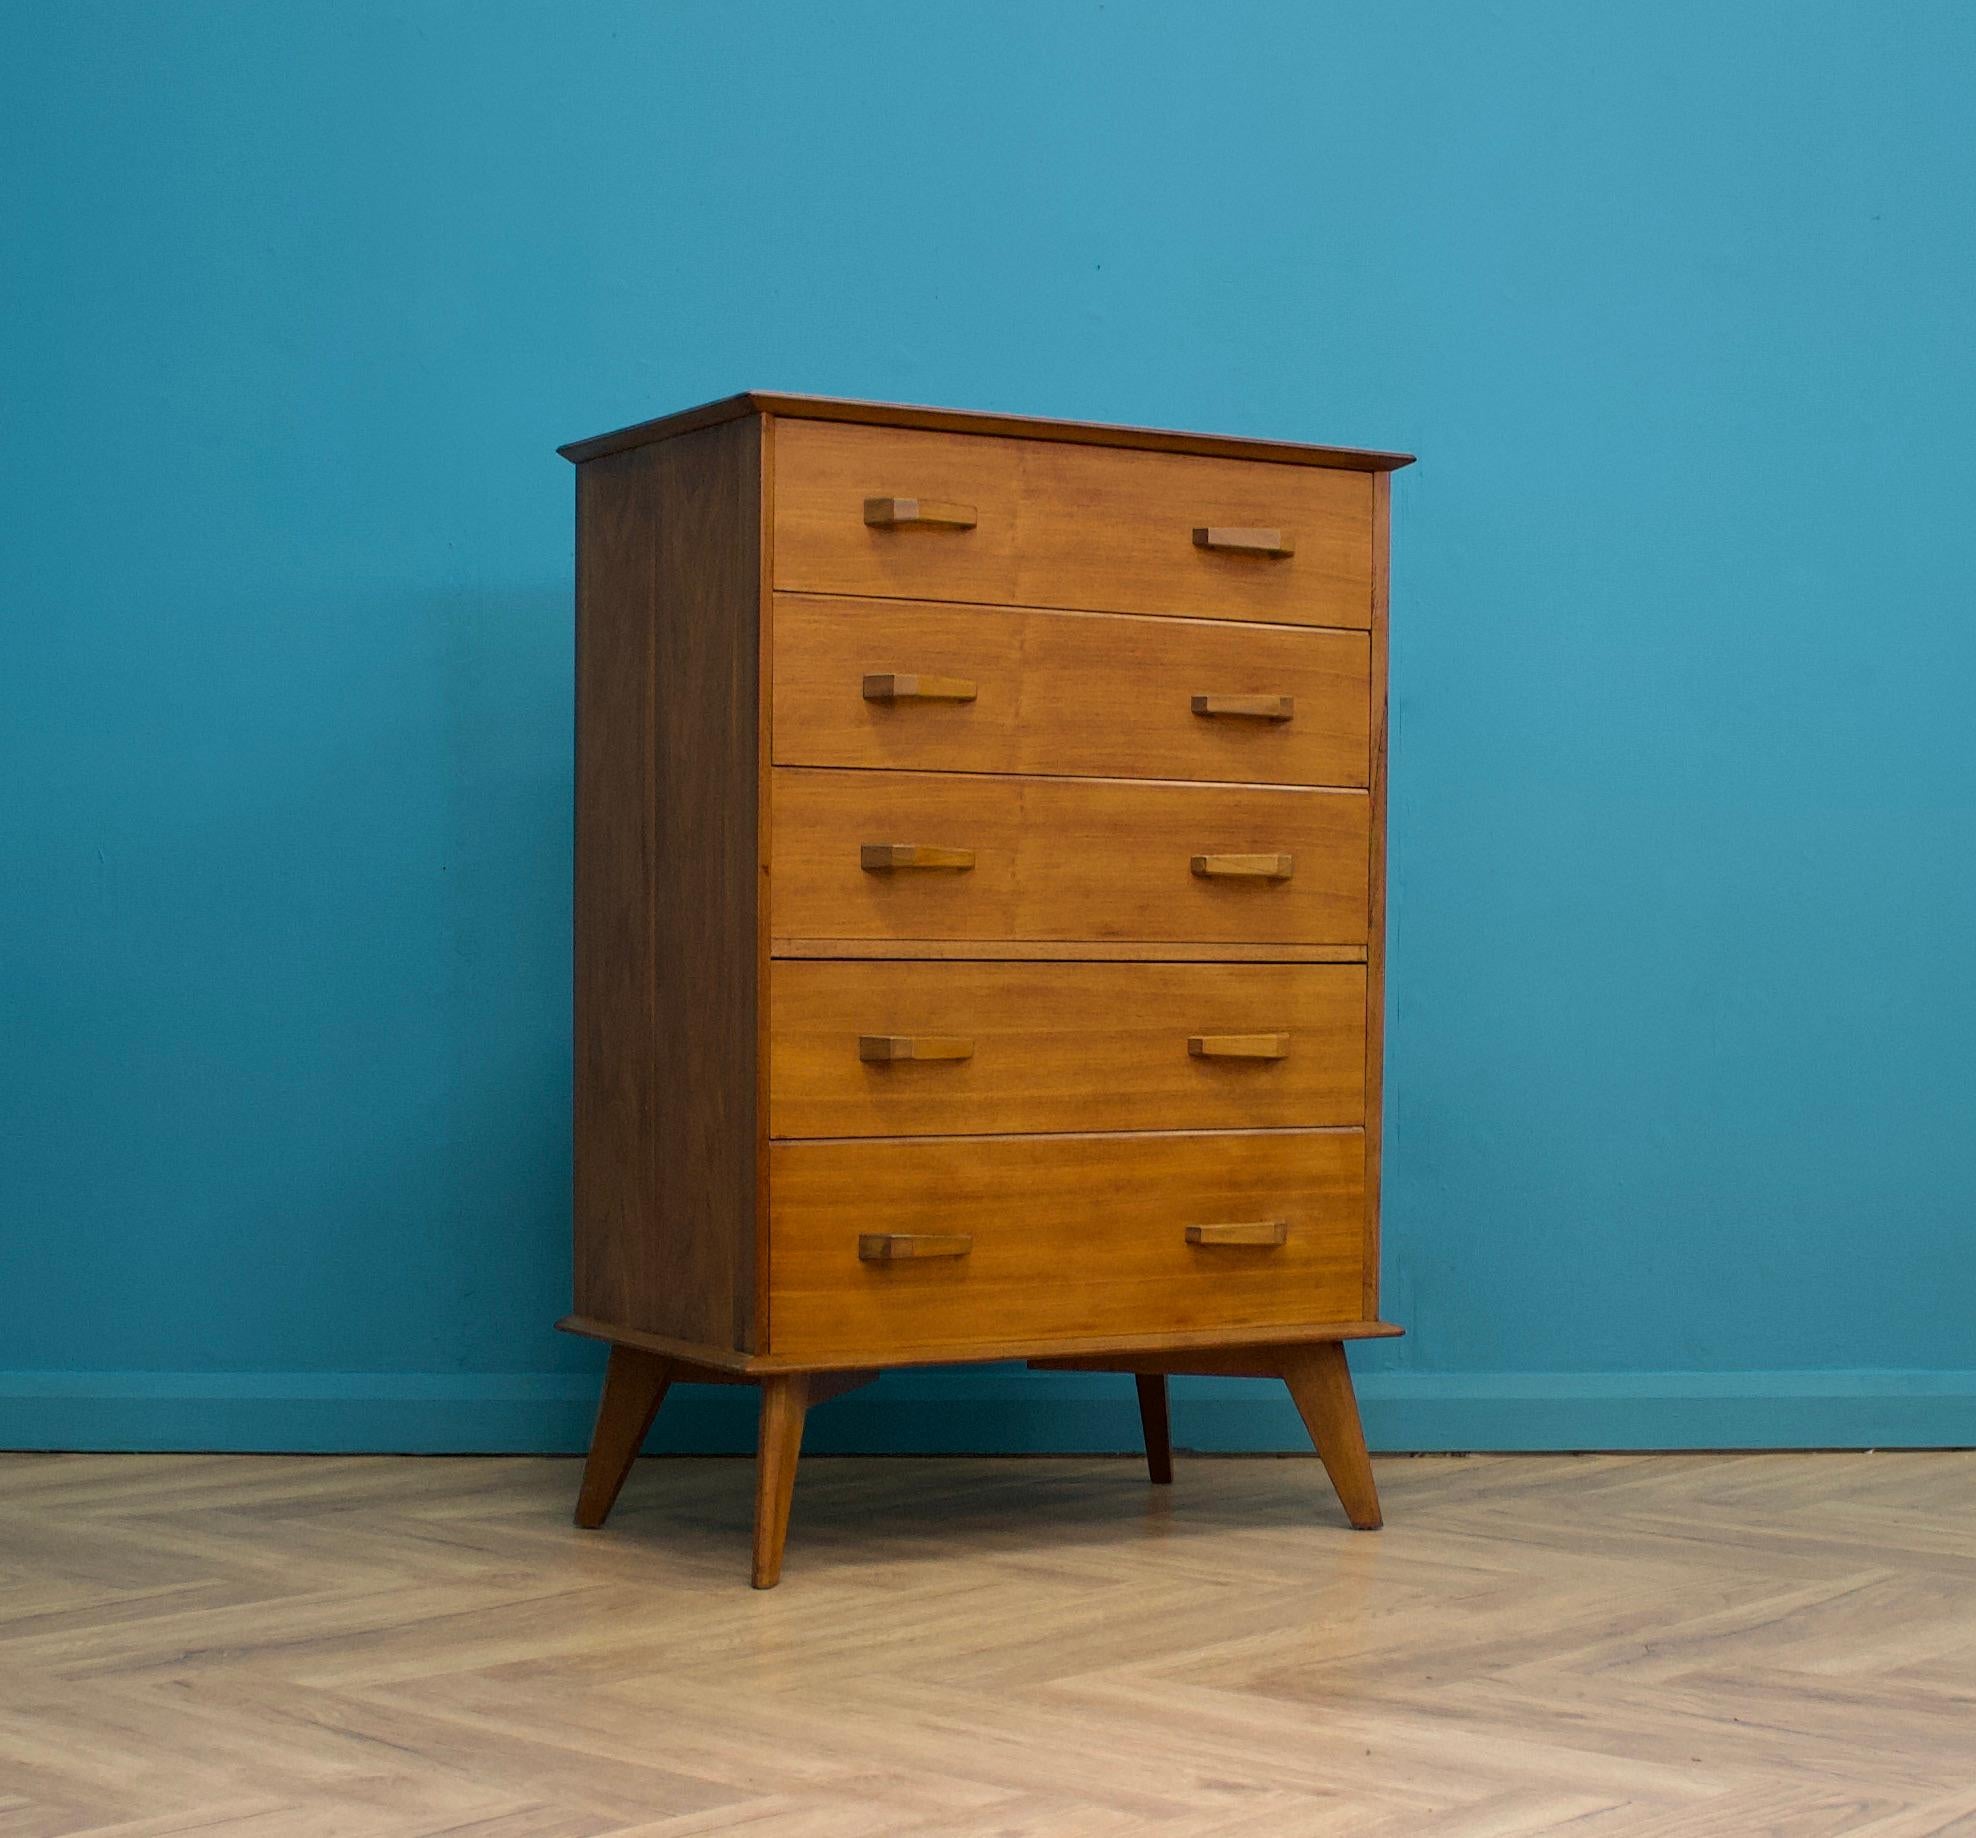 British Mid-Century Chest of Drawers in Walnut & Teak from AY Crown Furniture, 1960s For Sale